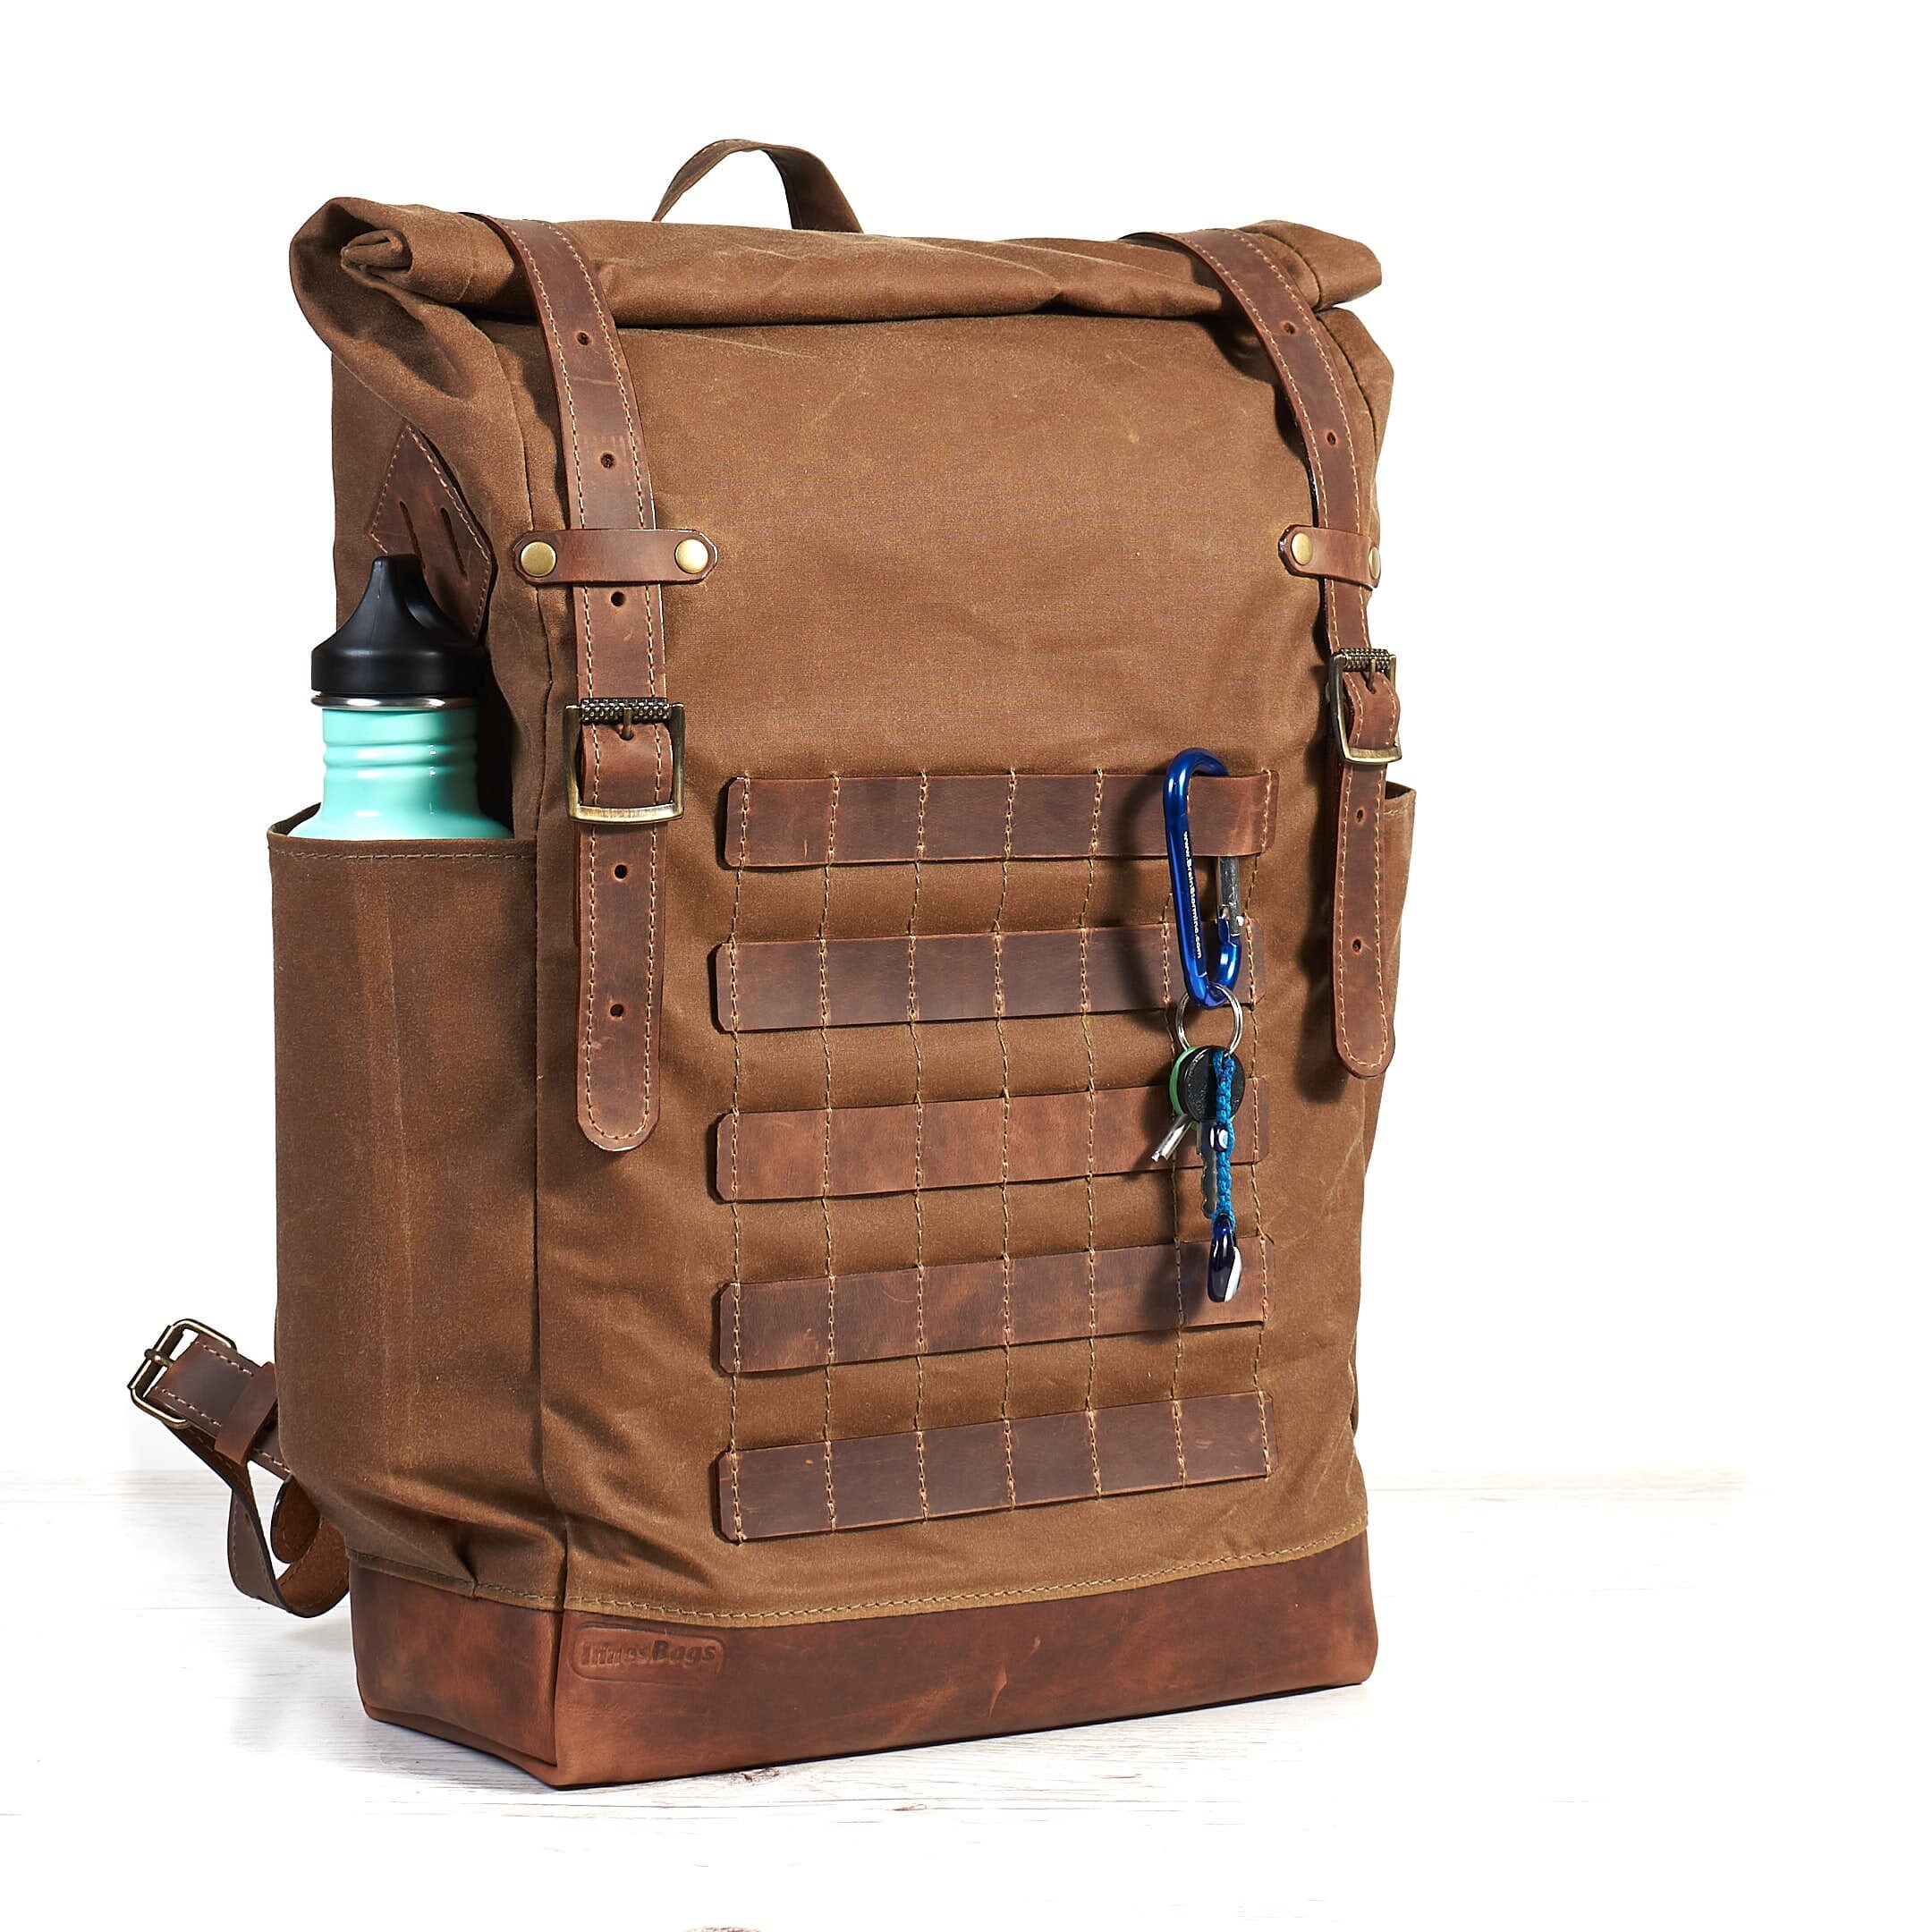 Tan brown waxed canvas backpack with molle grid. Leather crossbody bag.